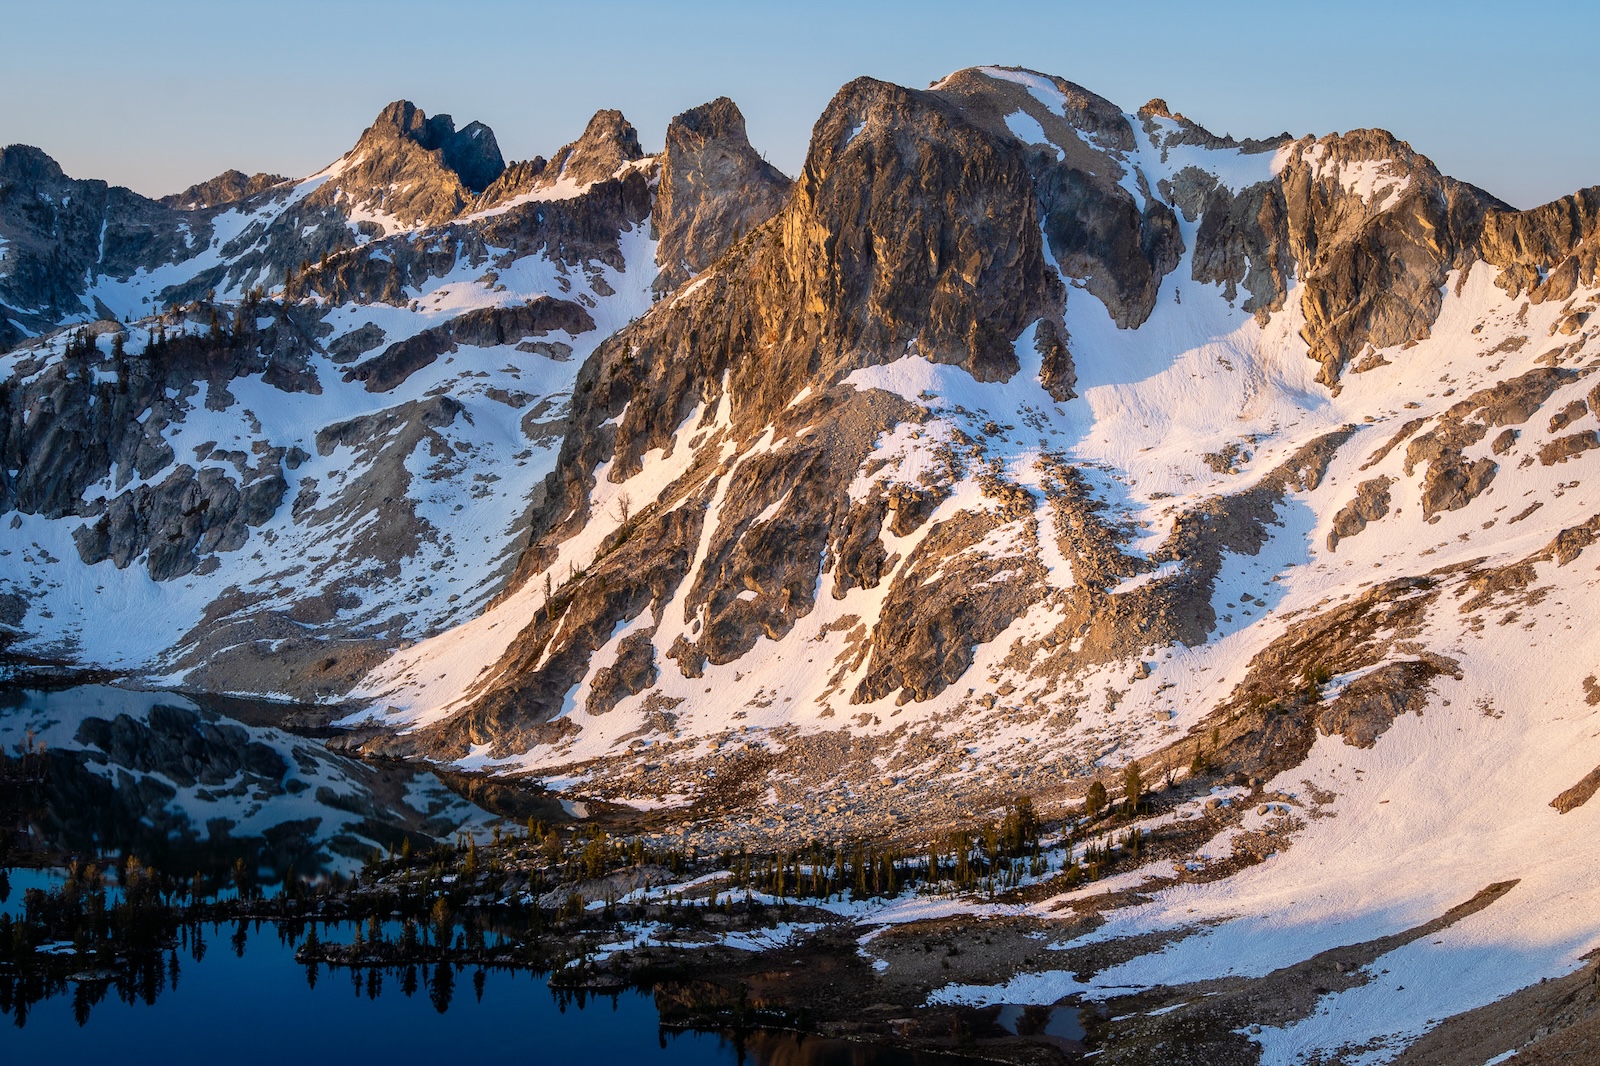 Mountains above Twin Lakes in Idaho's Sawtooth Wilderness. Photo by Brock Dallman